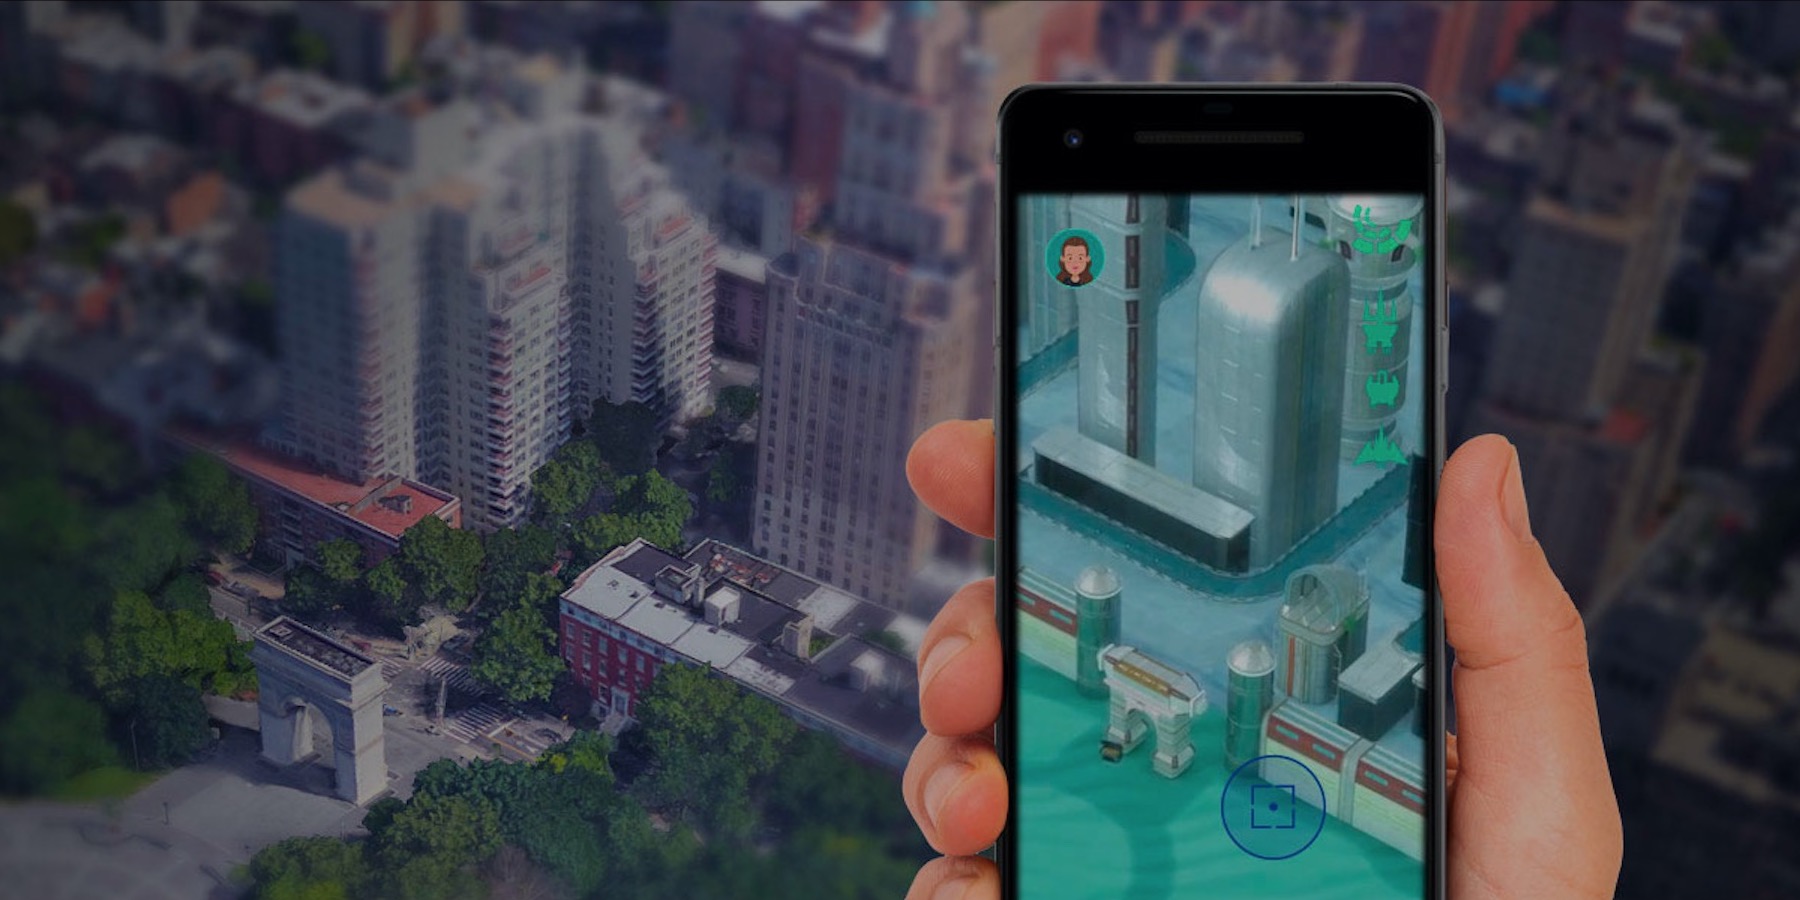 Google Maps app turns learning into a game with a monster as your avatar